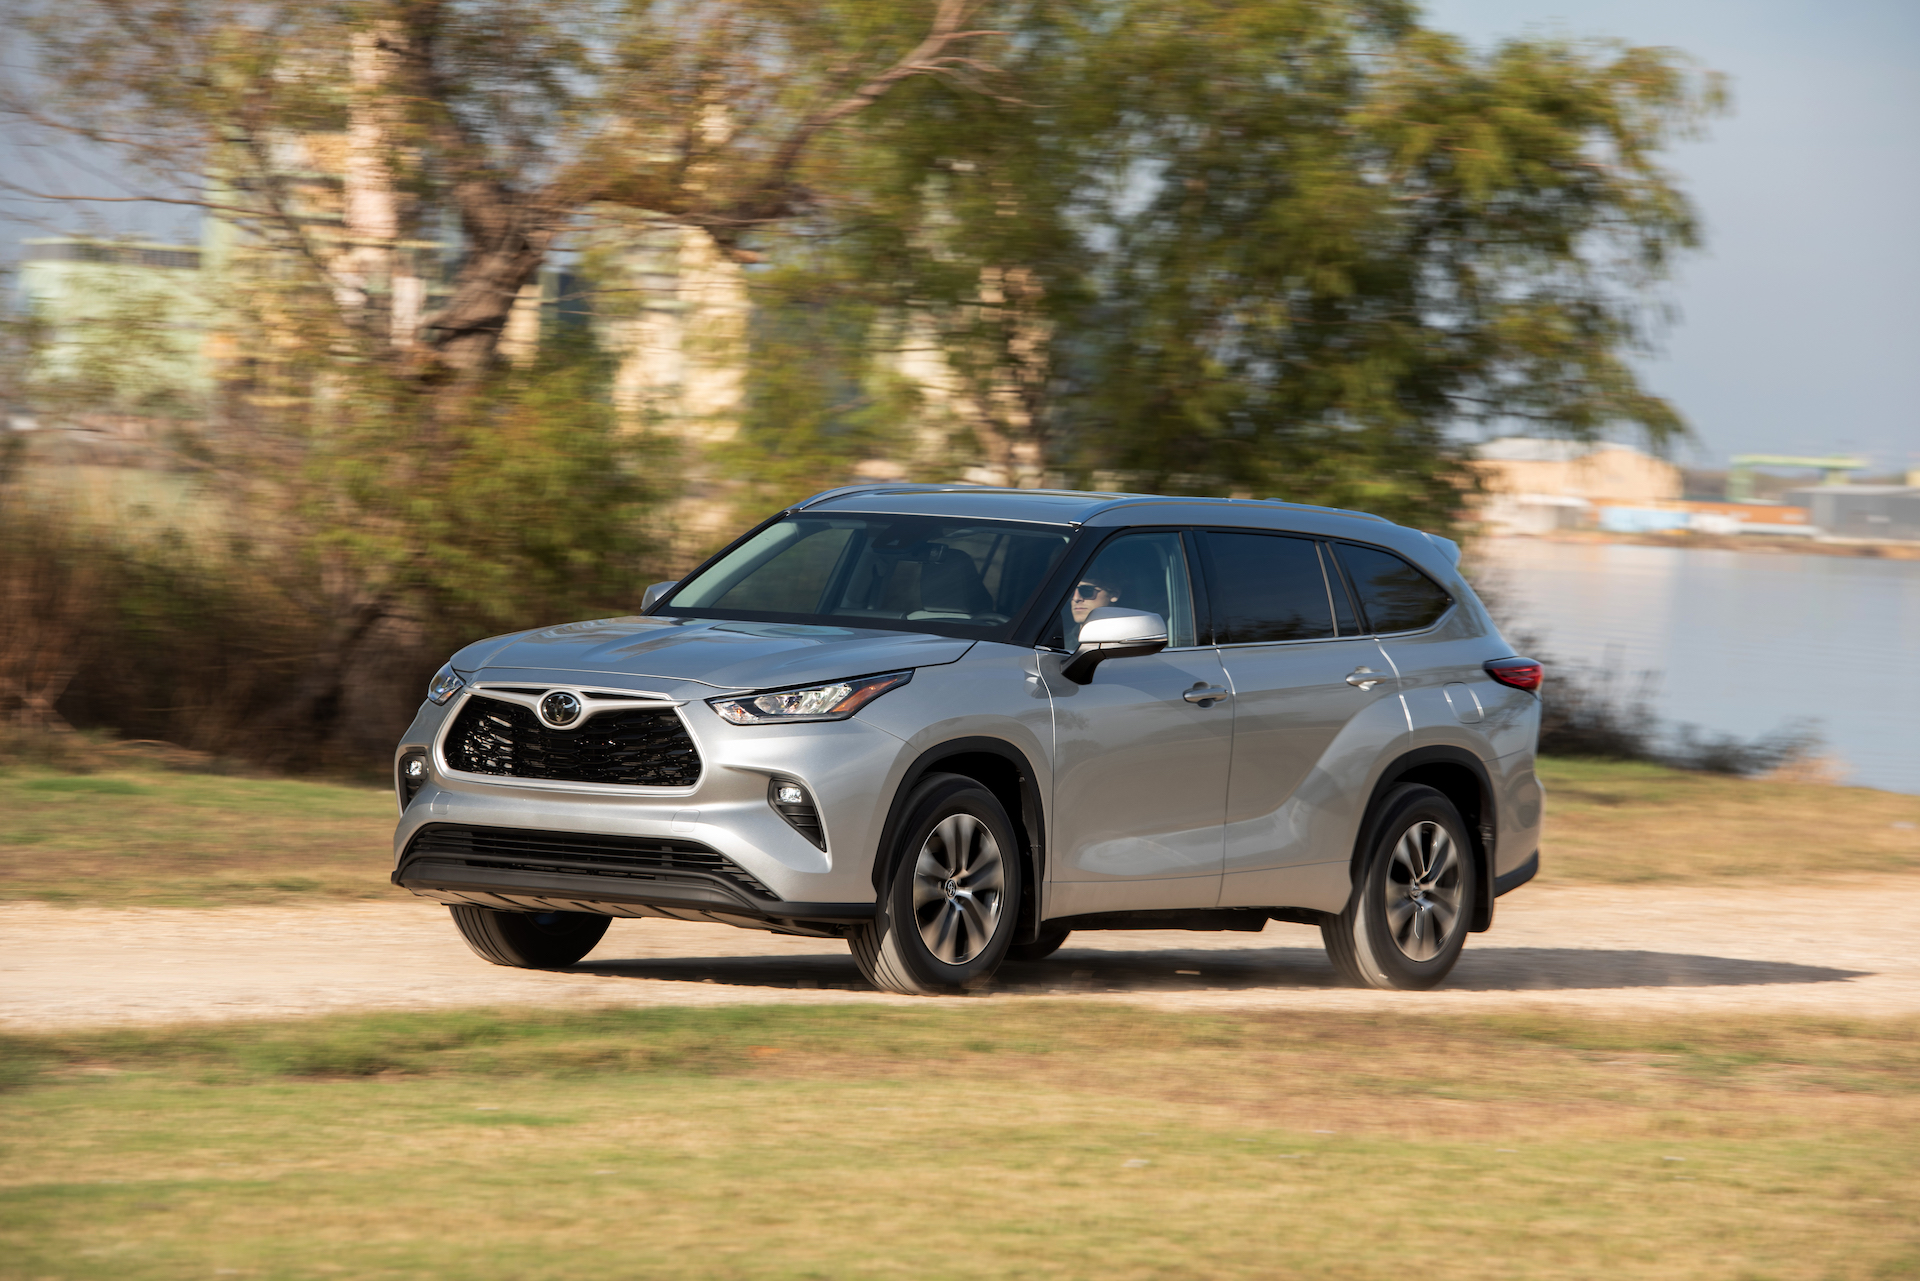 New And Used Toyota Highlander Prices Photos Reviews Specs